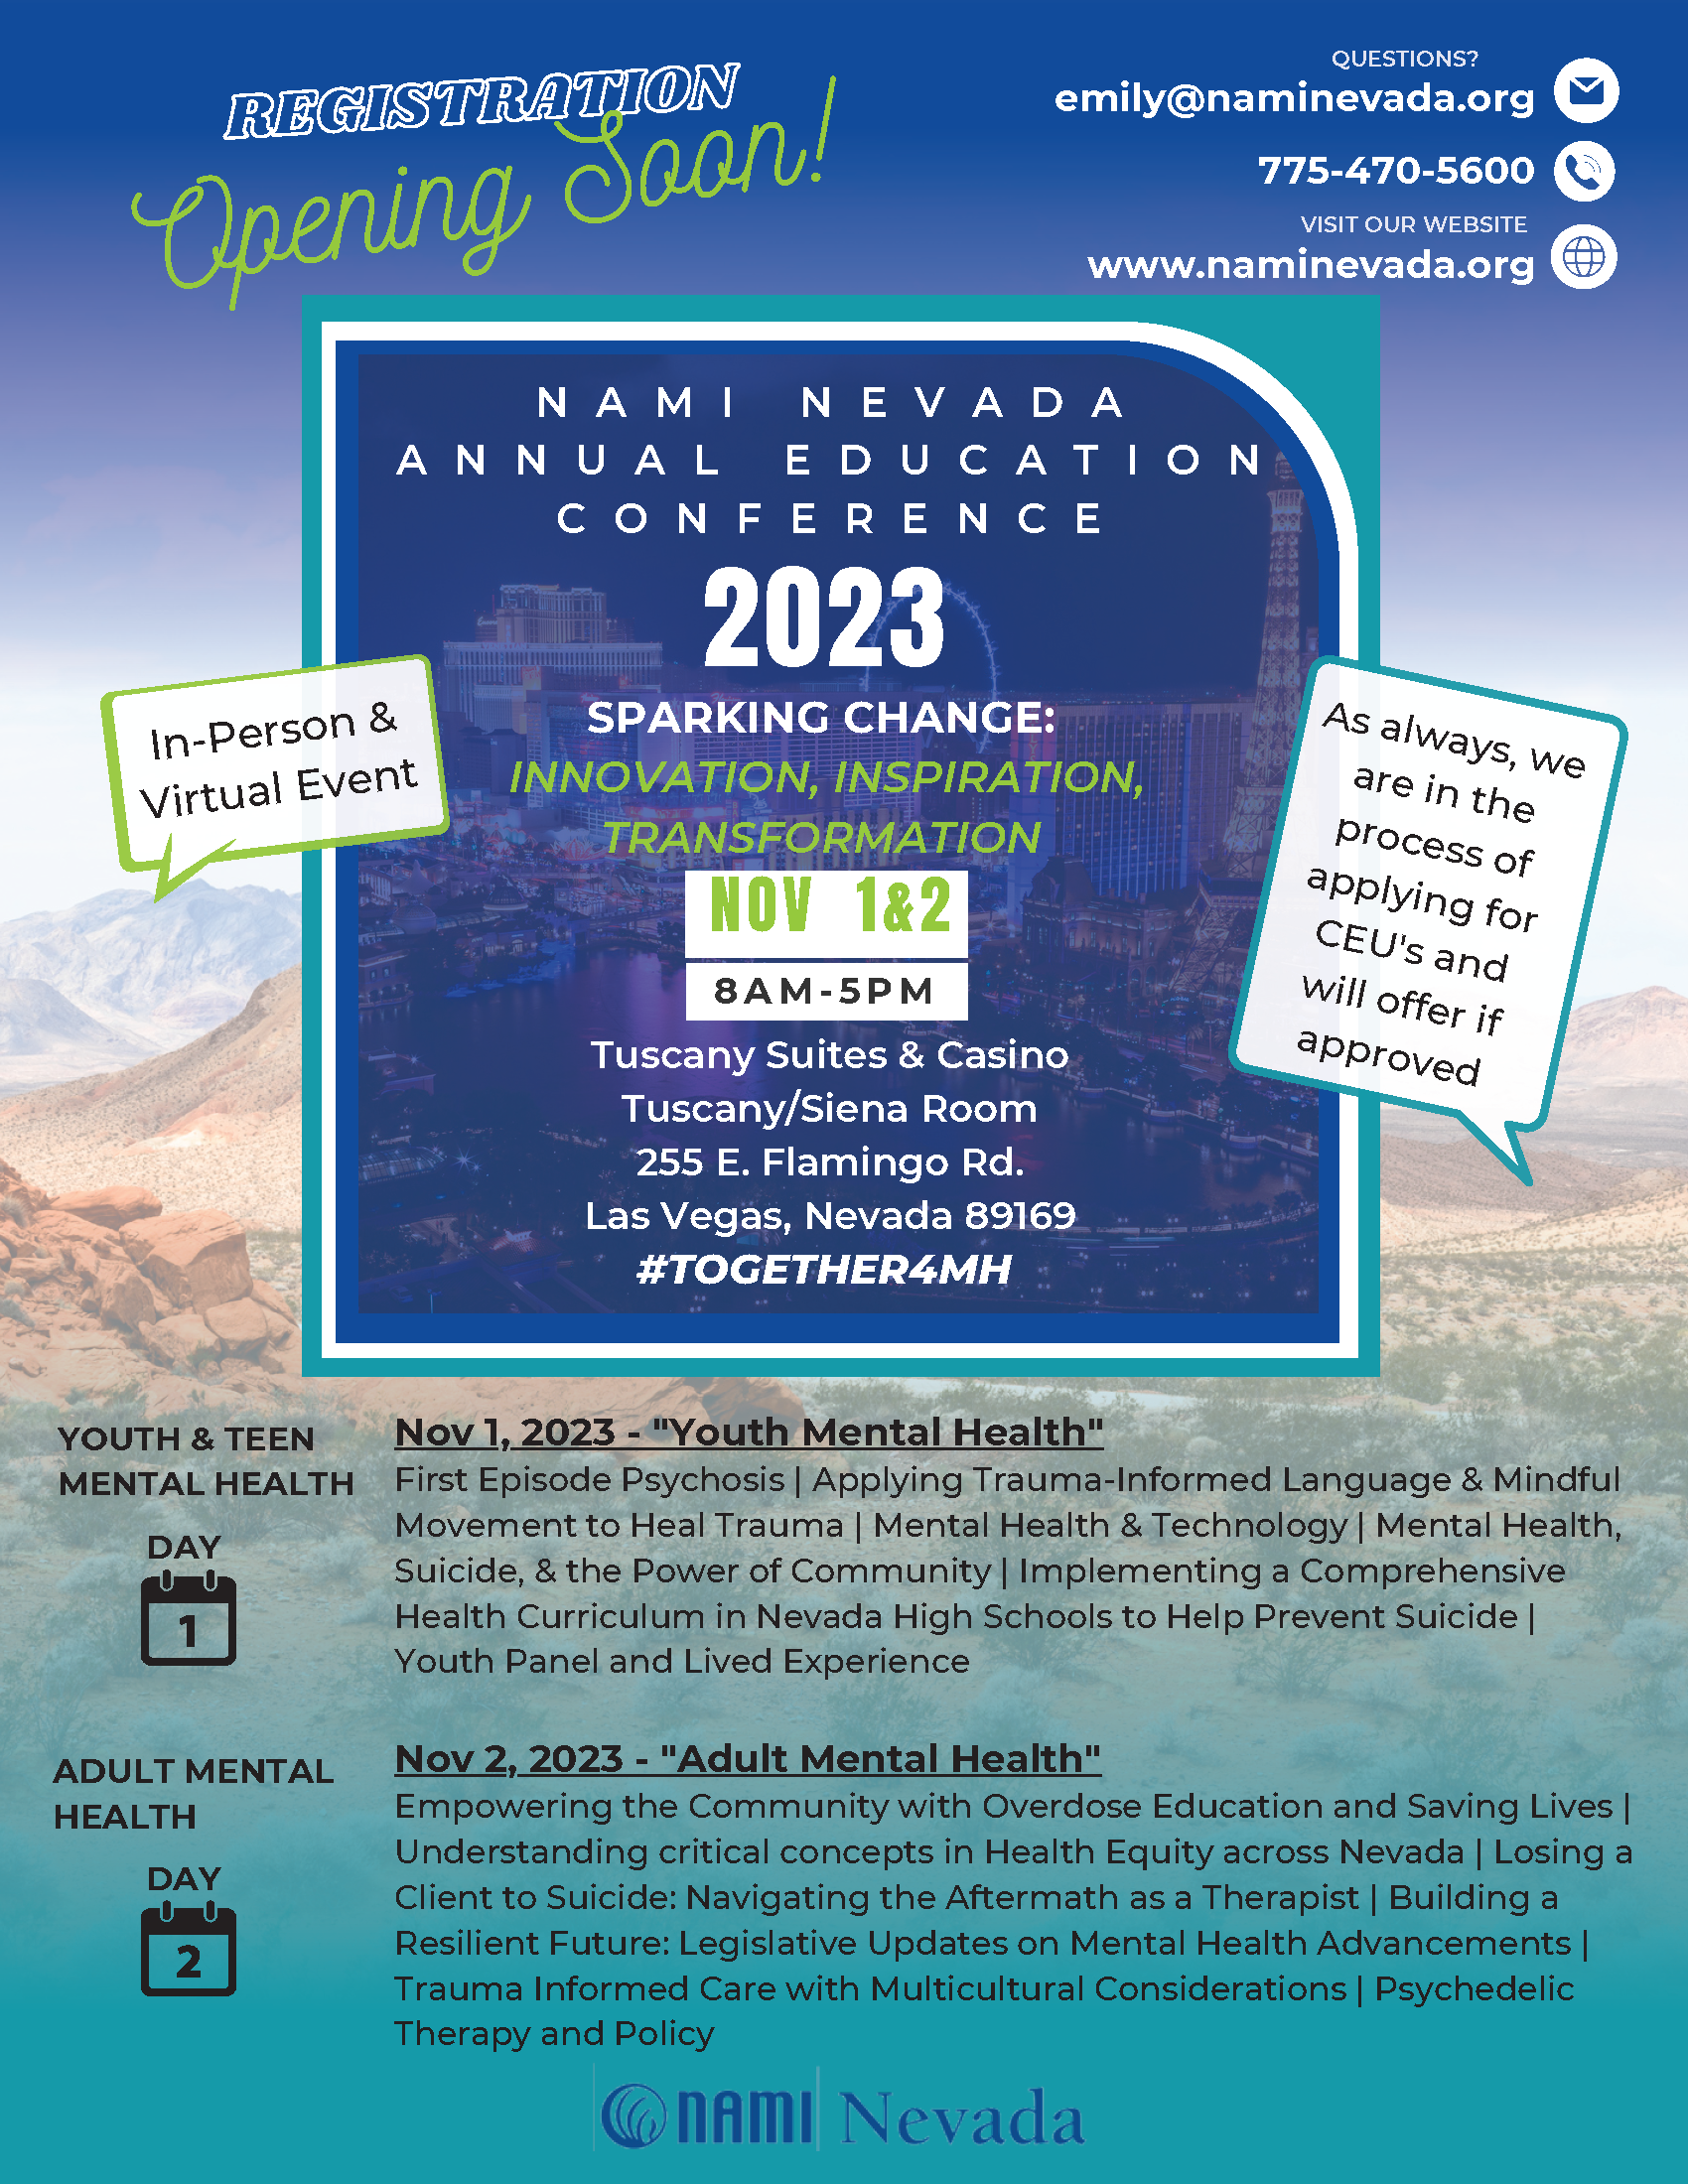 NAMI Nevada Annual Education Conference flyer – November 1 and 2, 2023